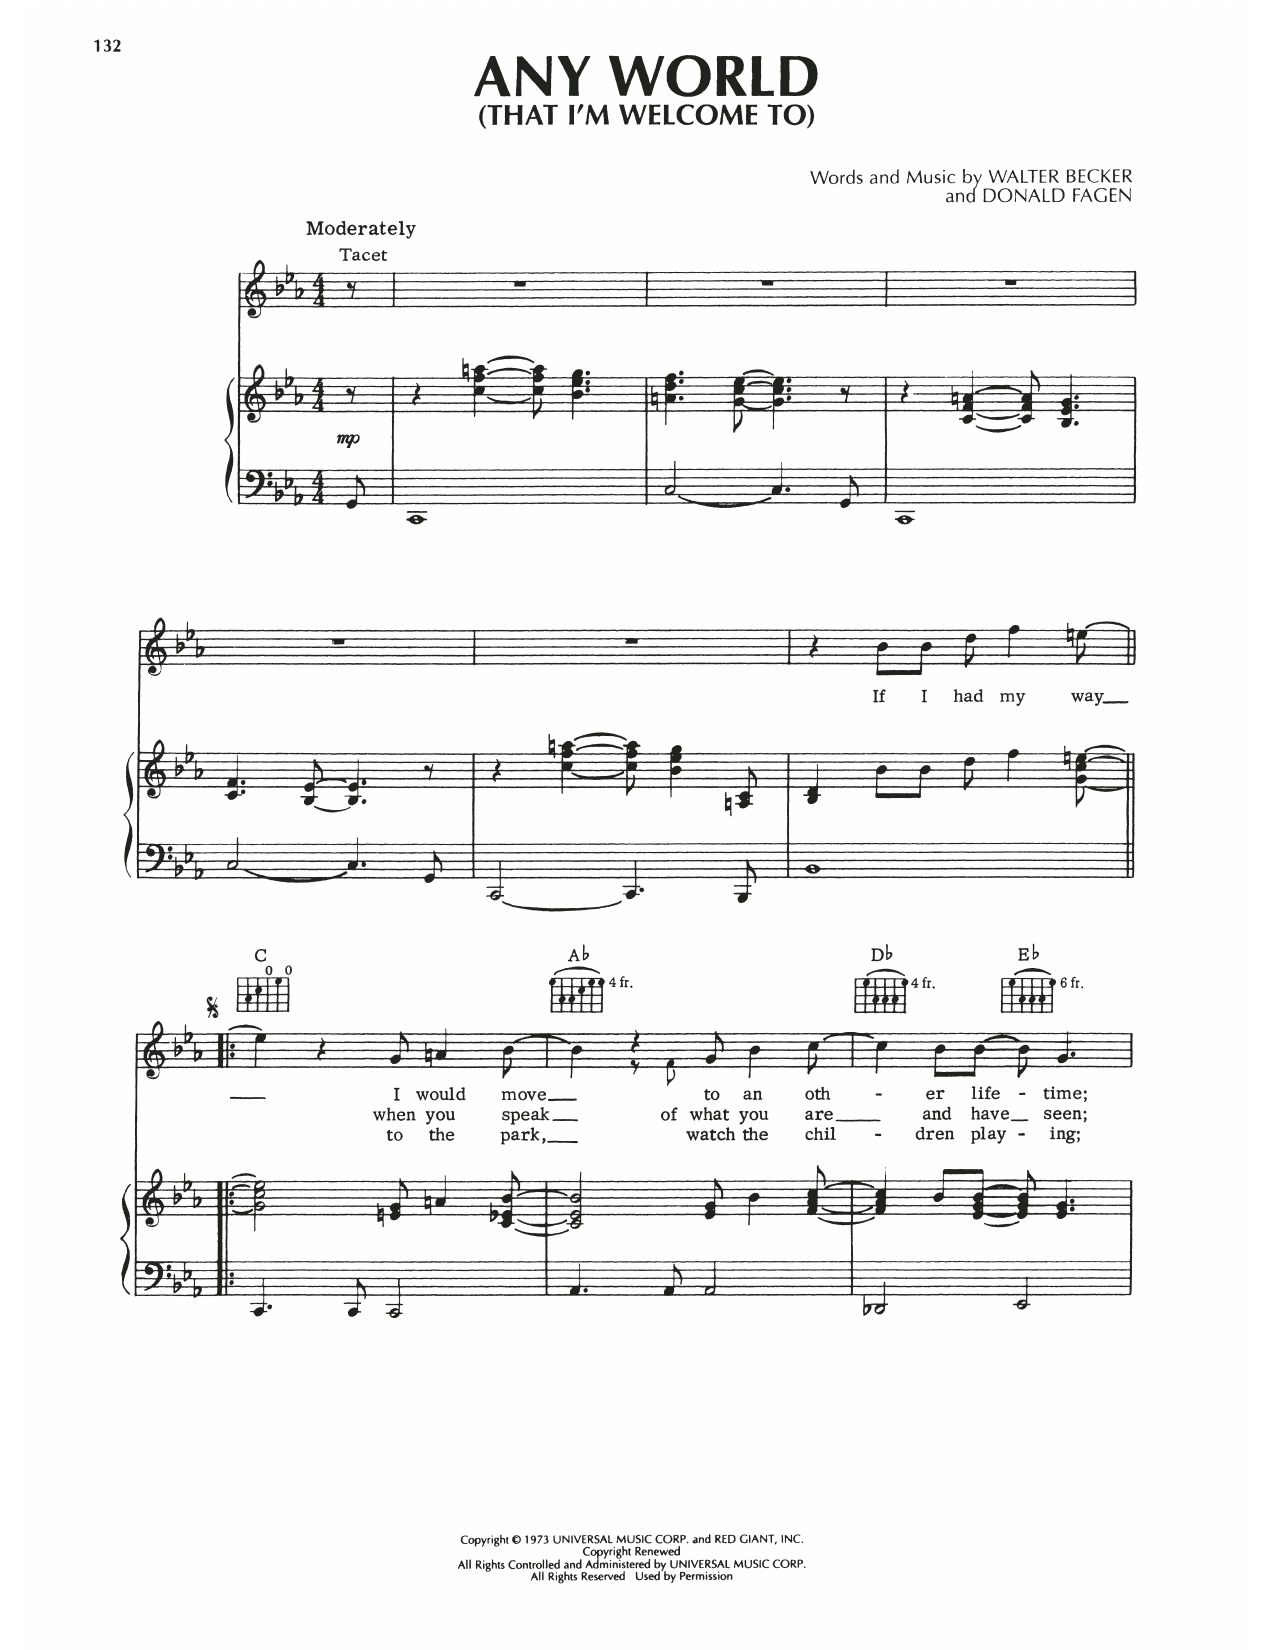 Download Steely Dan Any World (That I'm Welcome To) Sheet Music